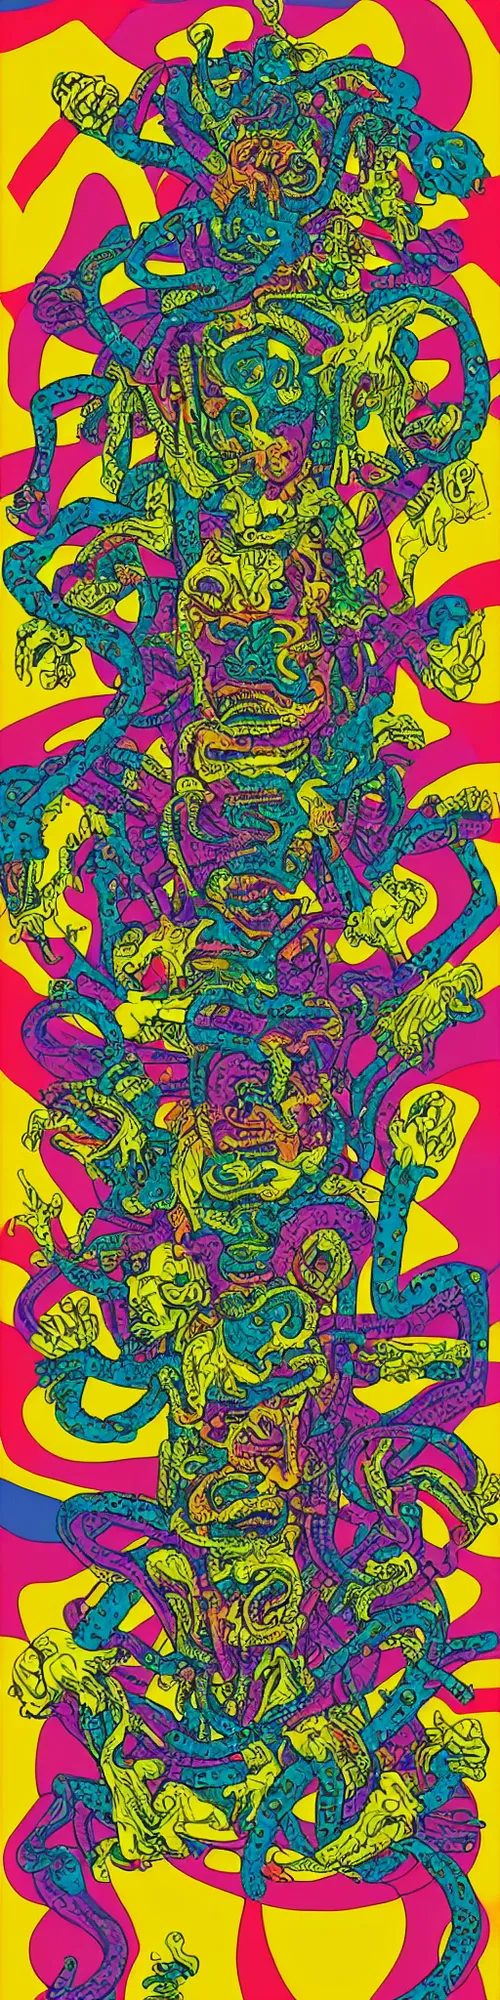 Prompt: tony the tiger dissolving into neon cereal pieces, cubensis, aztec, basil wolverton, r crumb, hr giger, mc escher, dali, muted but vibrant colors, ribbons and folds, tubing and wires, tape distortion